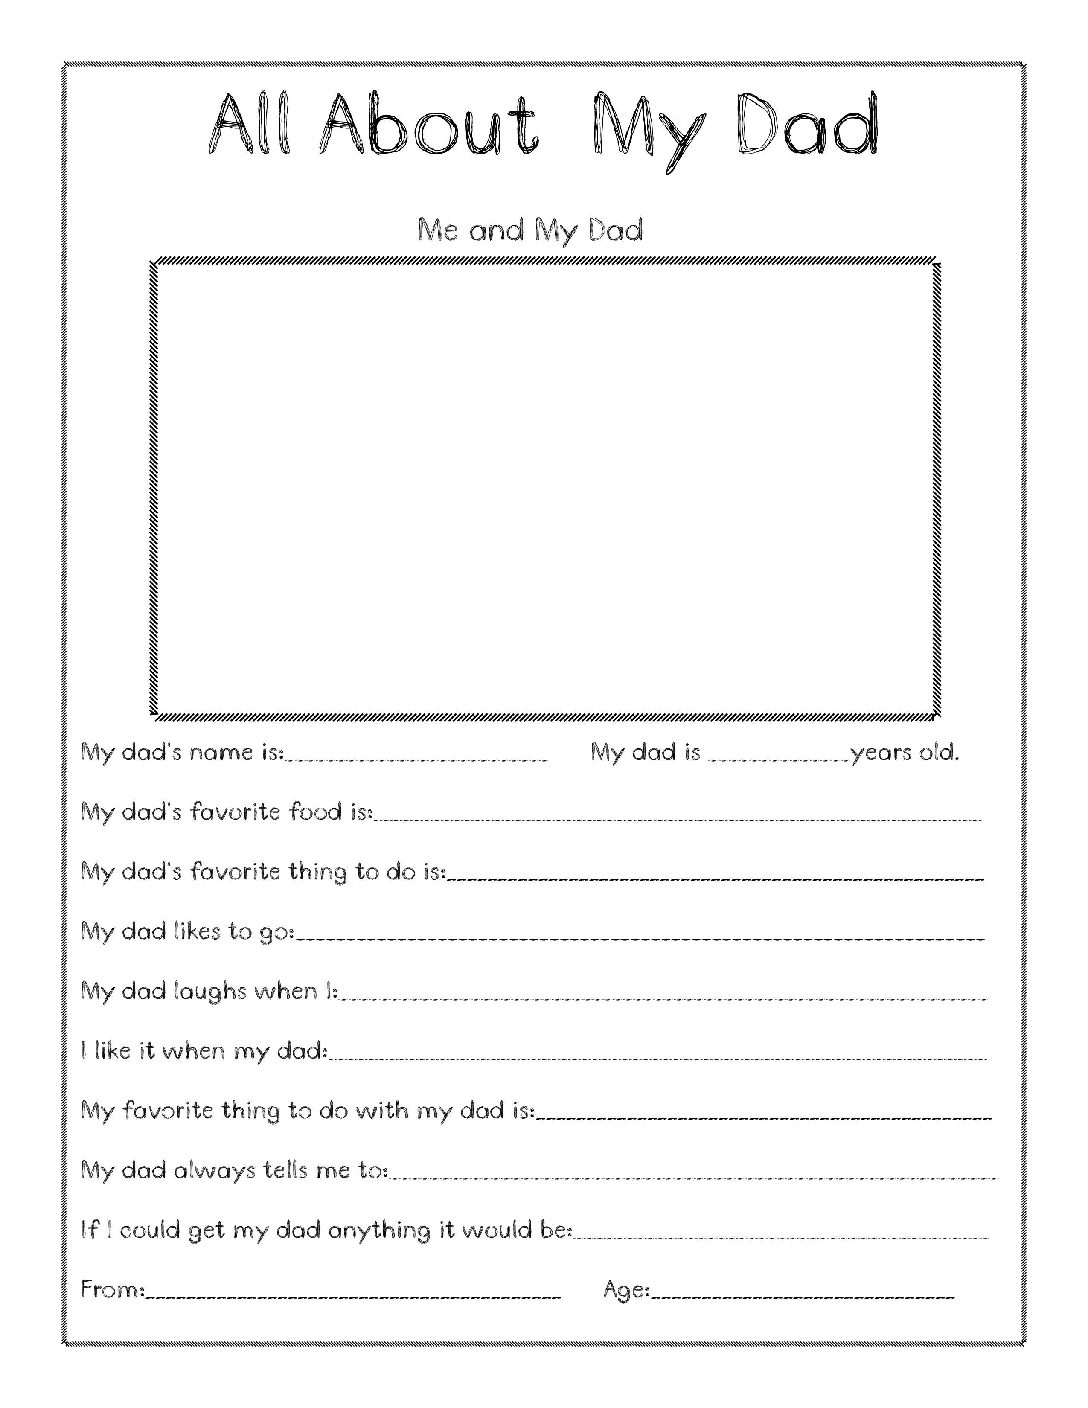 all-about-my-dad-printable-pdf-get-your-hands-on-amazing-free-printables